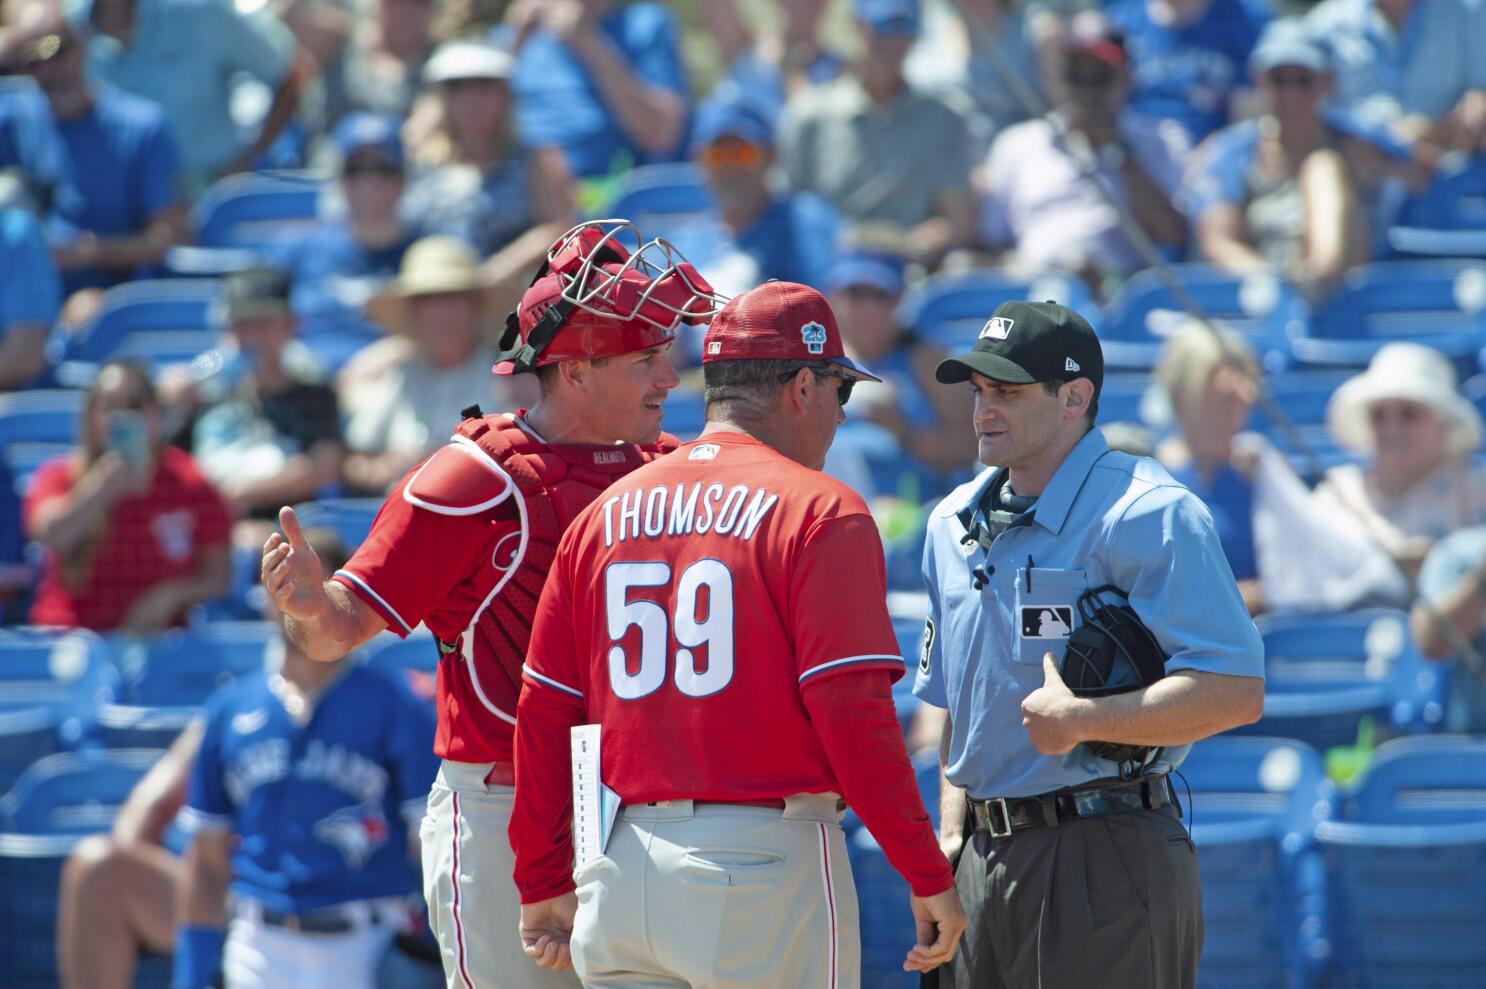 Philadelphia Phillies - J.T. Realmuto, wearing the red pinstripe uniform,  pointing to the dugout after driving in a run.